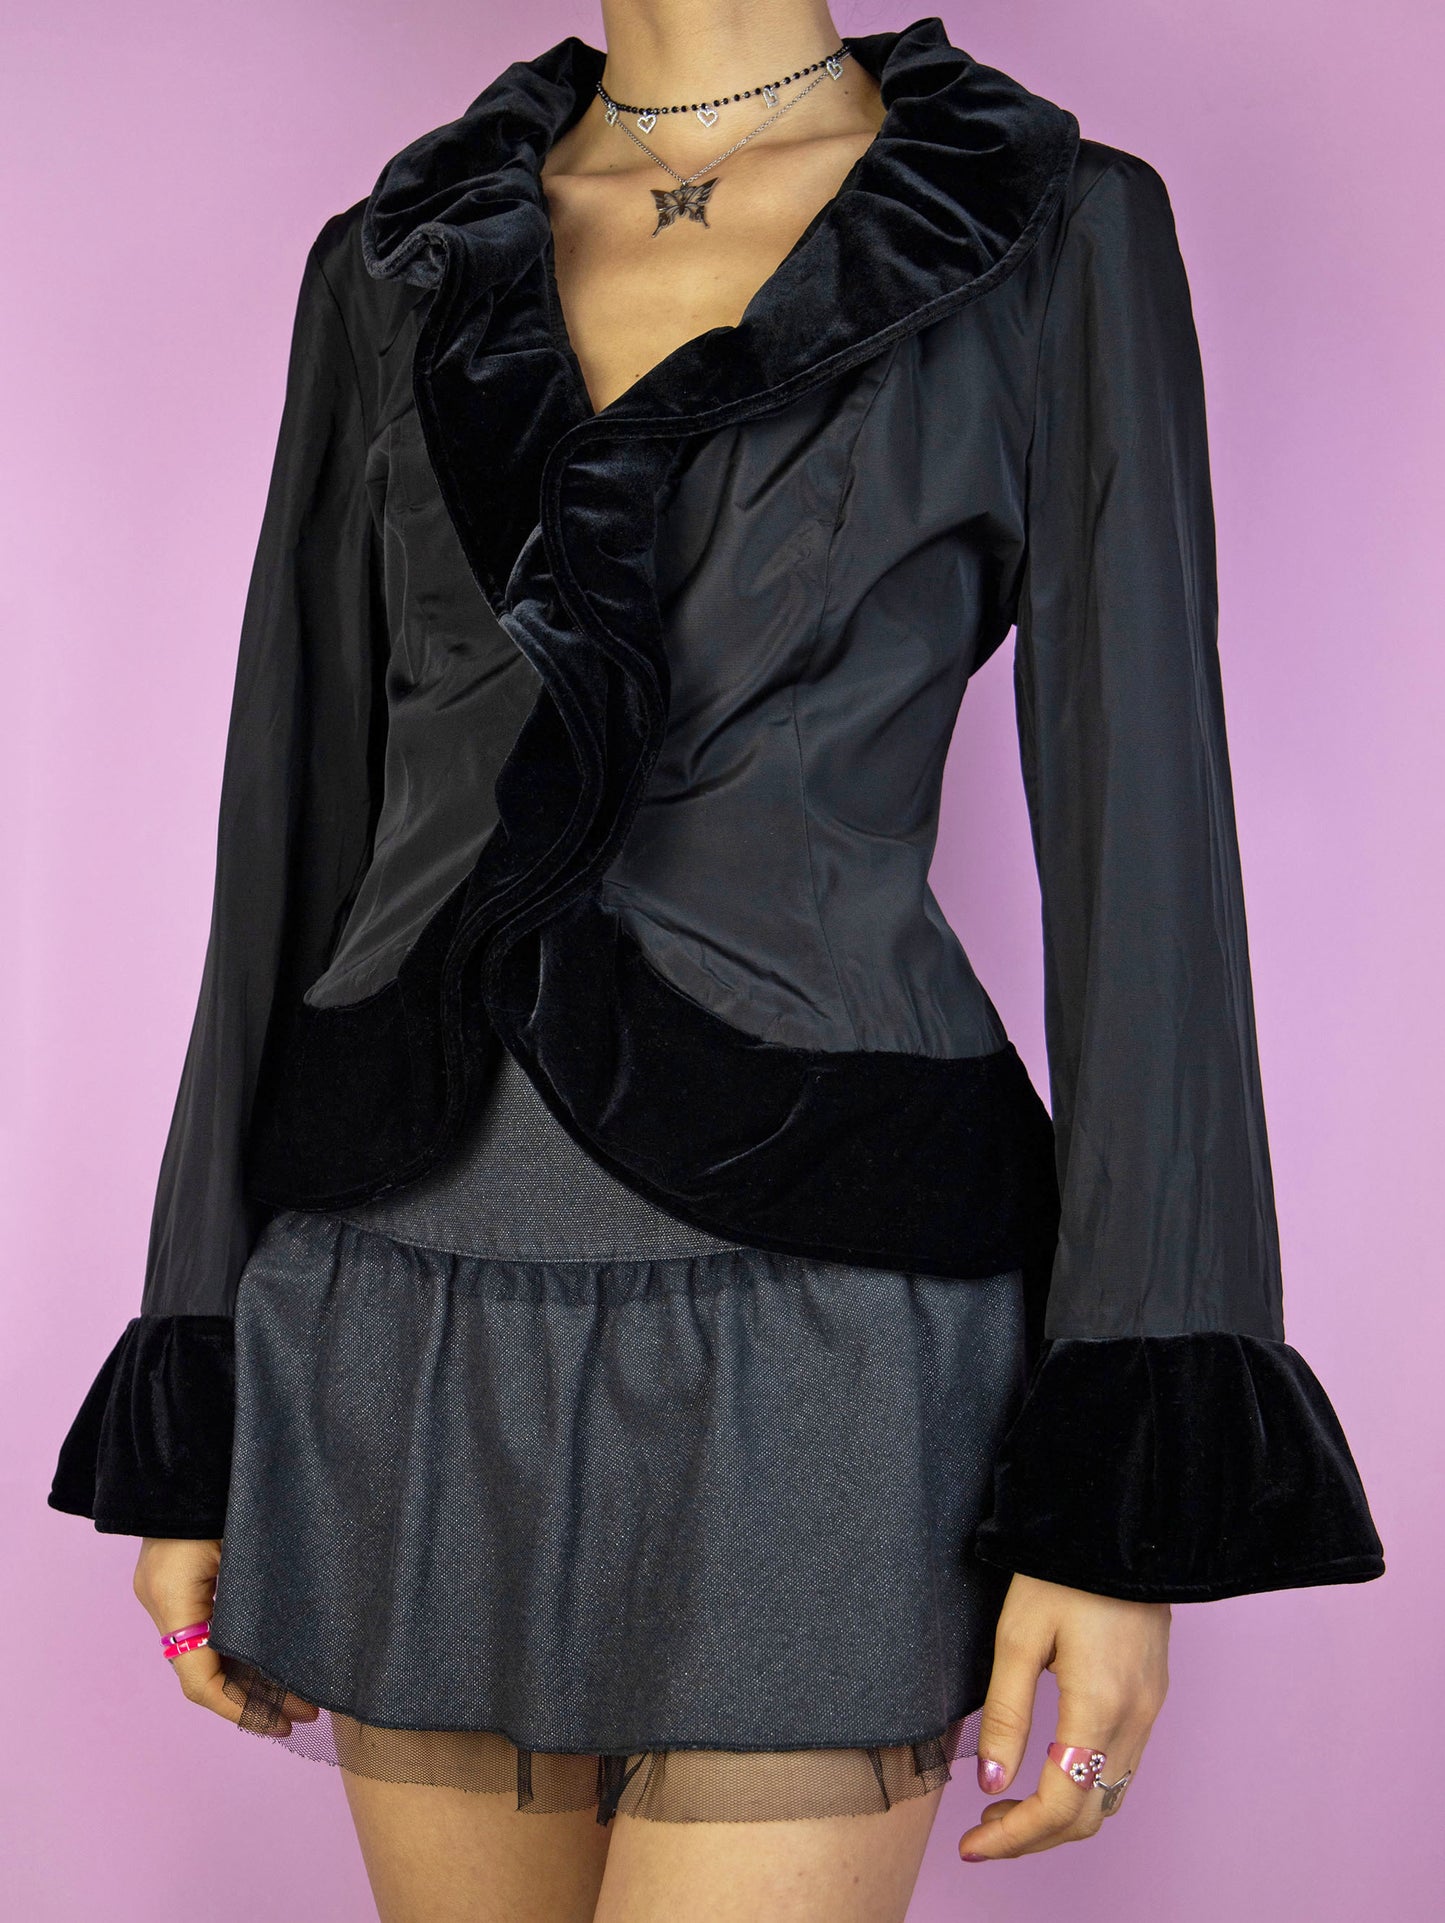 The Vintage 90s Black Ruffle Jacket is an elegant, romantic, whimsygoth-inspired statement piece, featuring velvet ruffle details and a front hook closure.